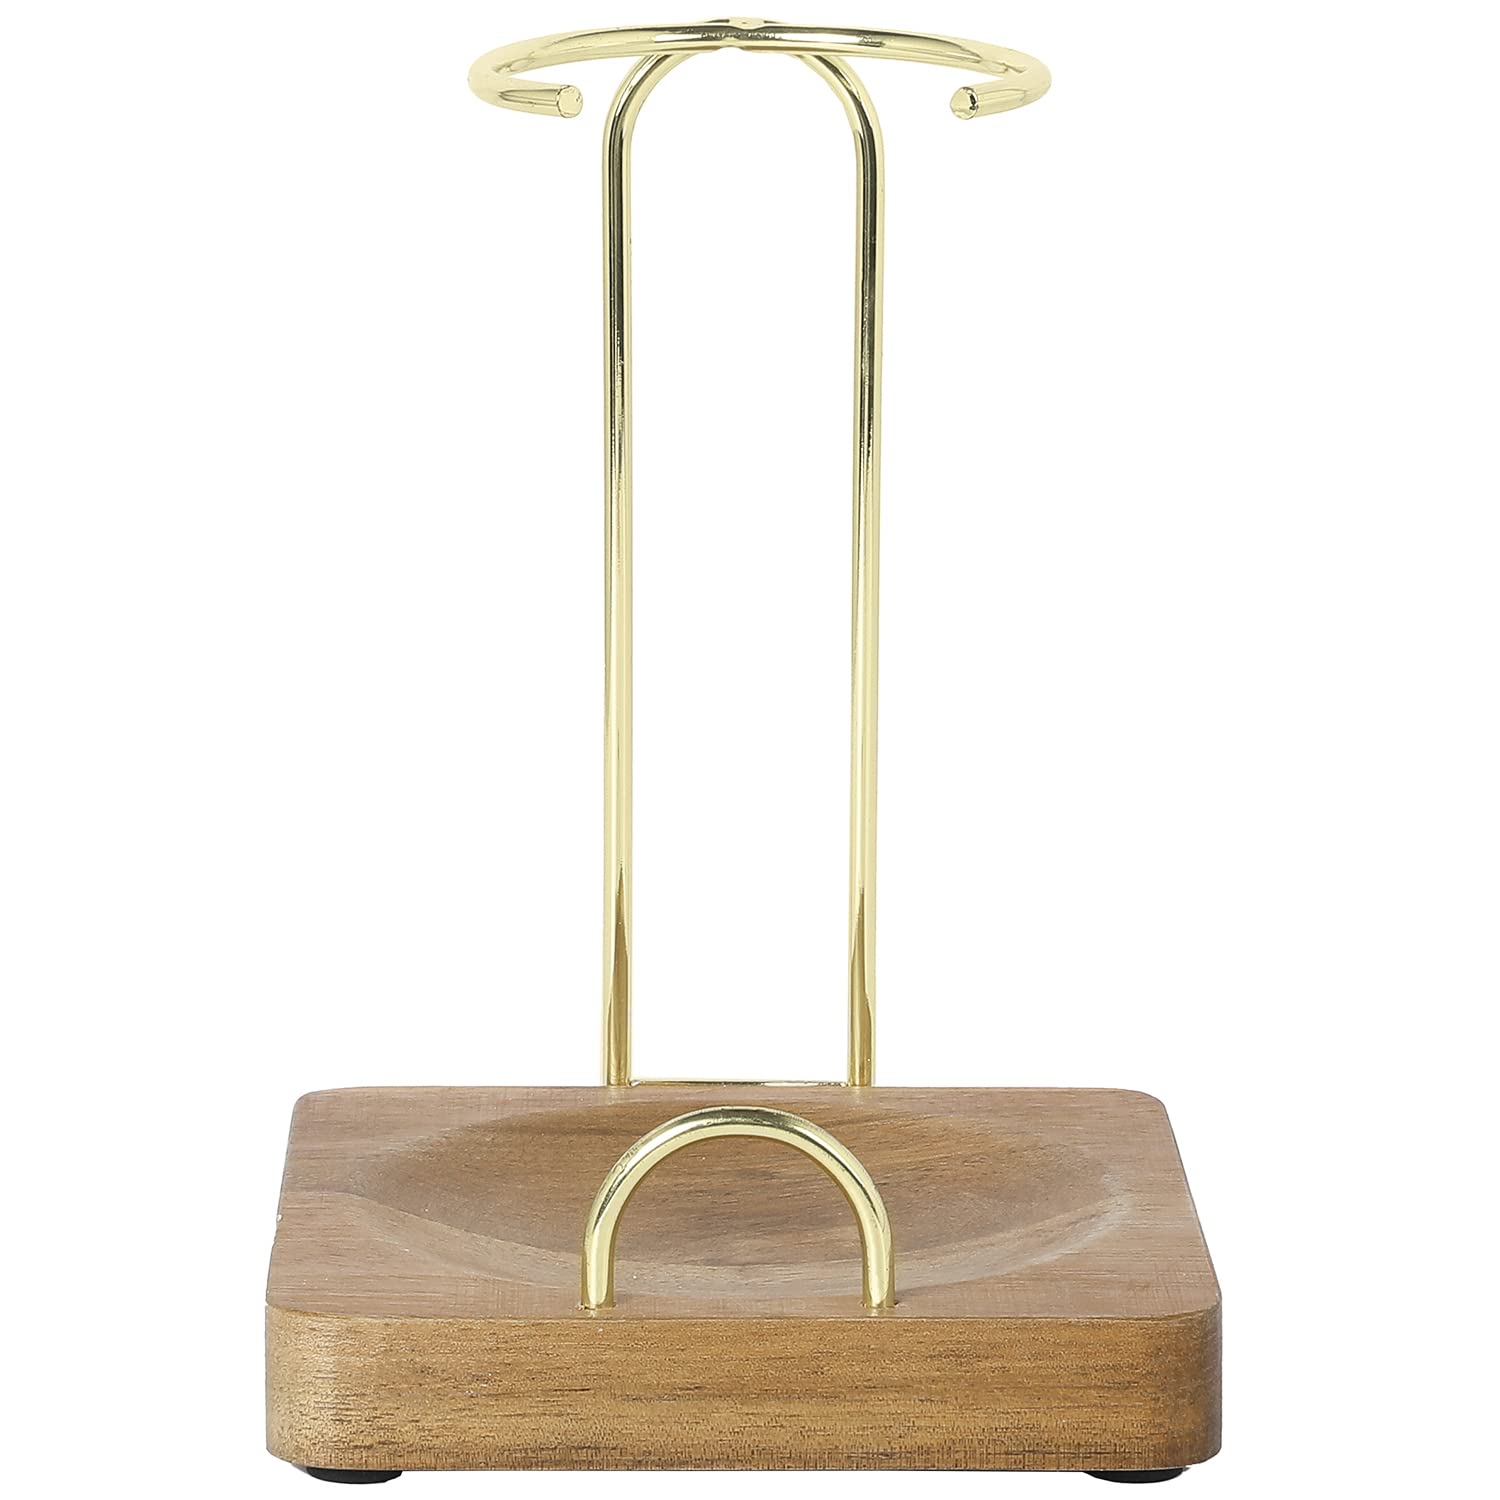 MyGift Modern Acacia Wood Upright Kitchen Spatula Utensil Holder Spoon Rest with Brass Tone Metal Wire, Countertop Vertical Standing Ladle Holder